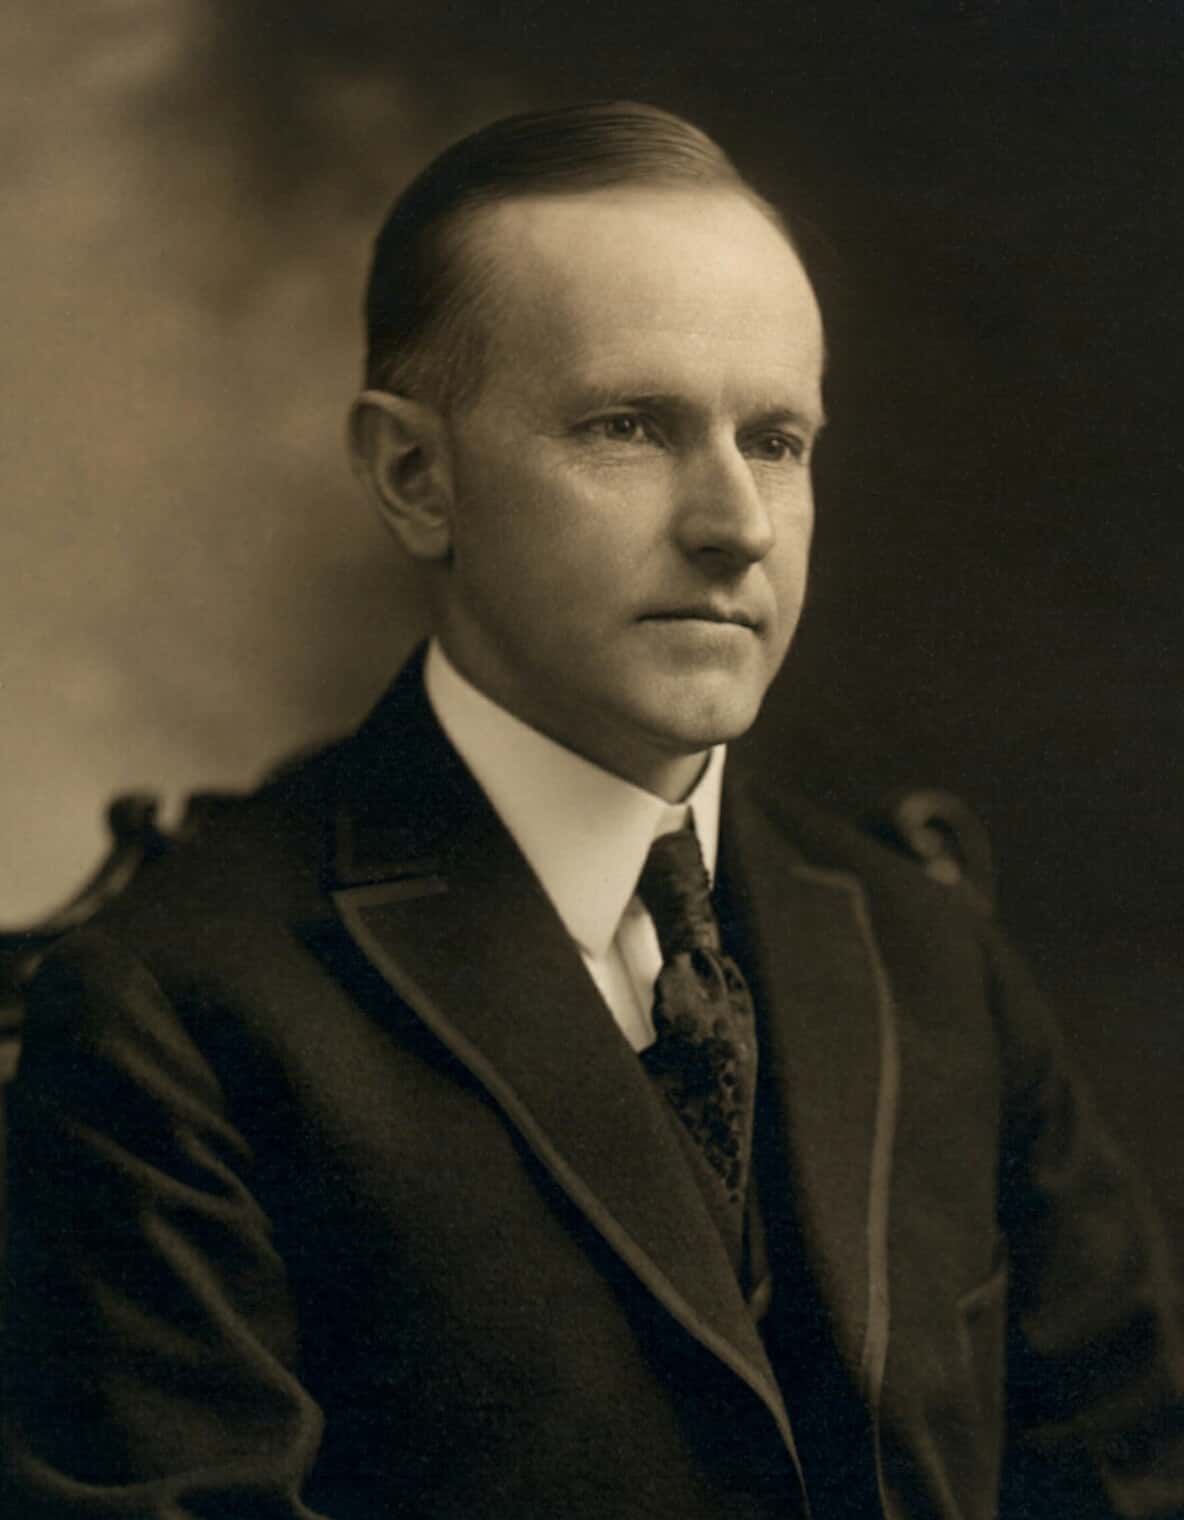 calvin_coolidge_bw_head_and_shoulders_photo_portrait_seated_1919